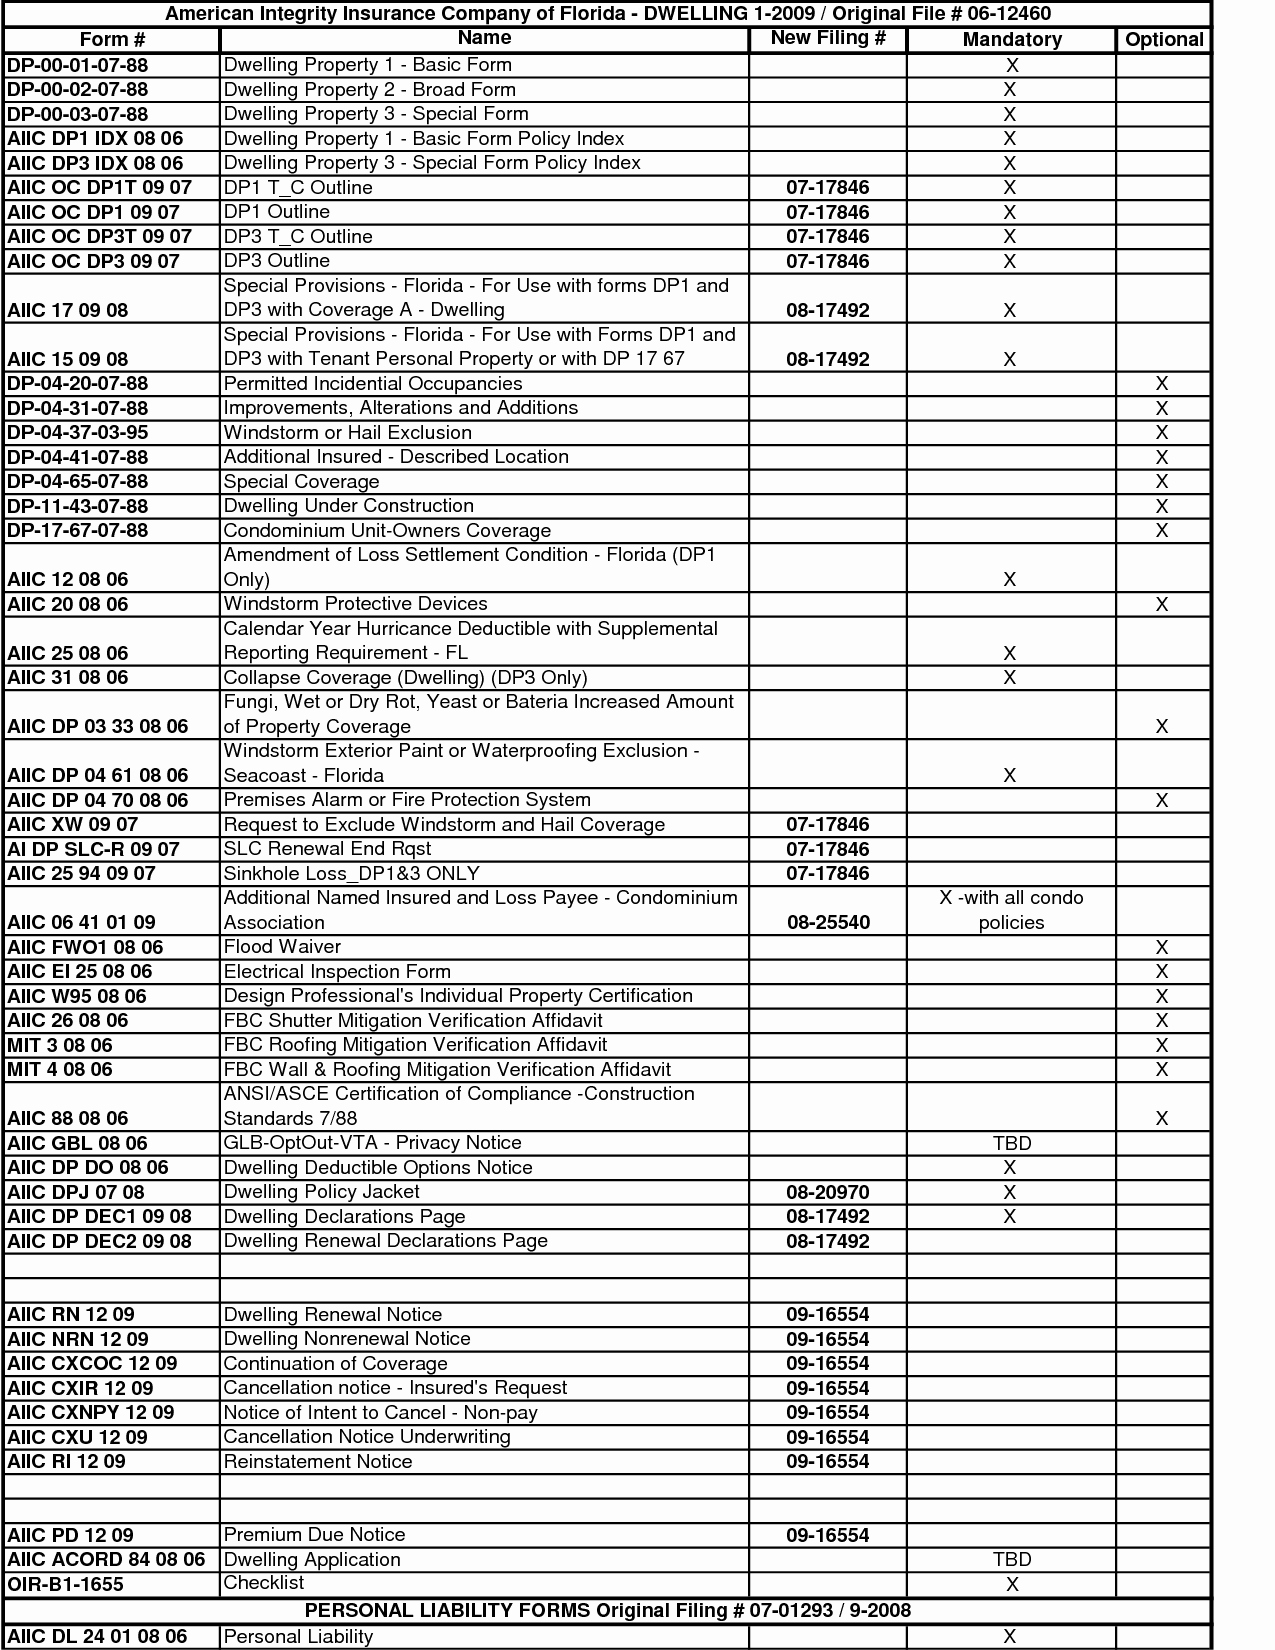 Home Inspection Report Template Beautiful Printable Home Inspection Checklist